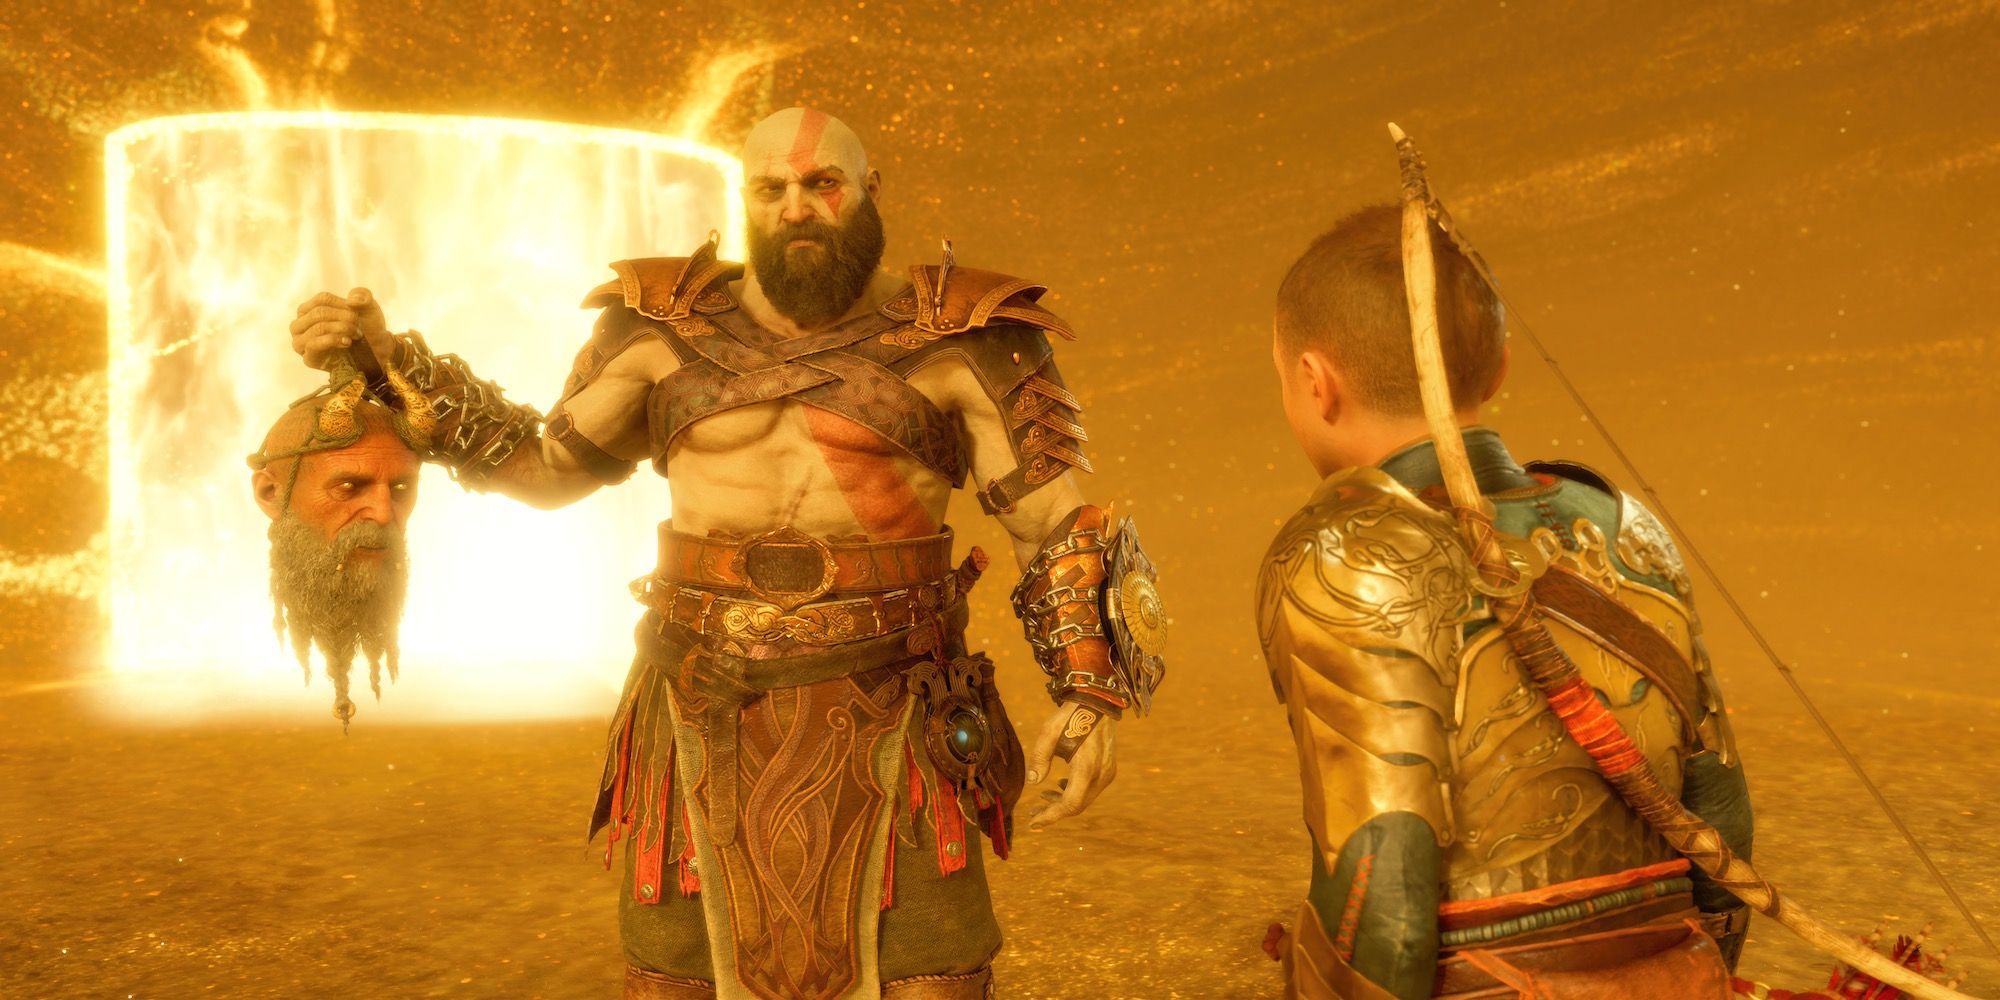 god-of-war-ragnarok-has-the-most-immersive-moment-in-gaming-history